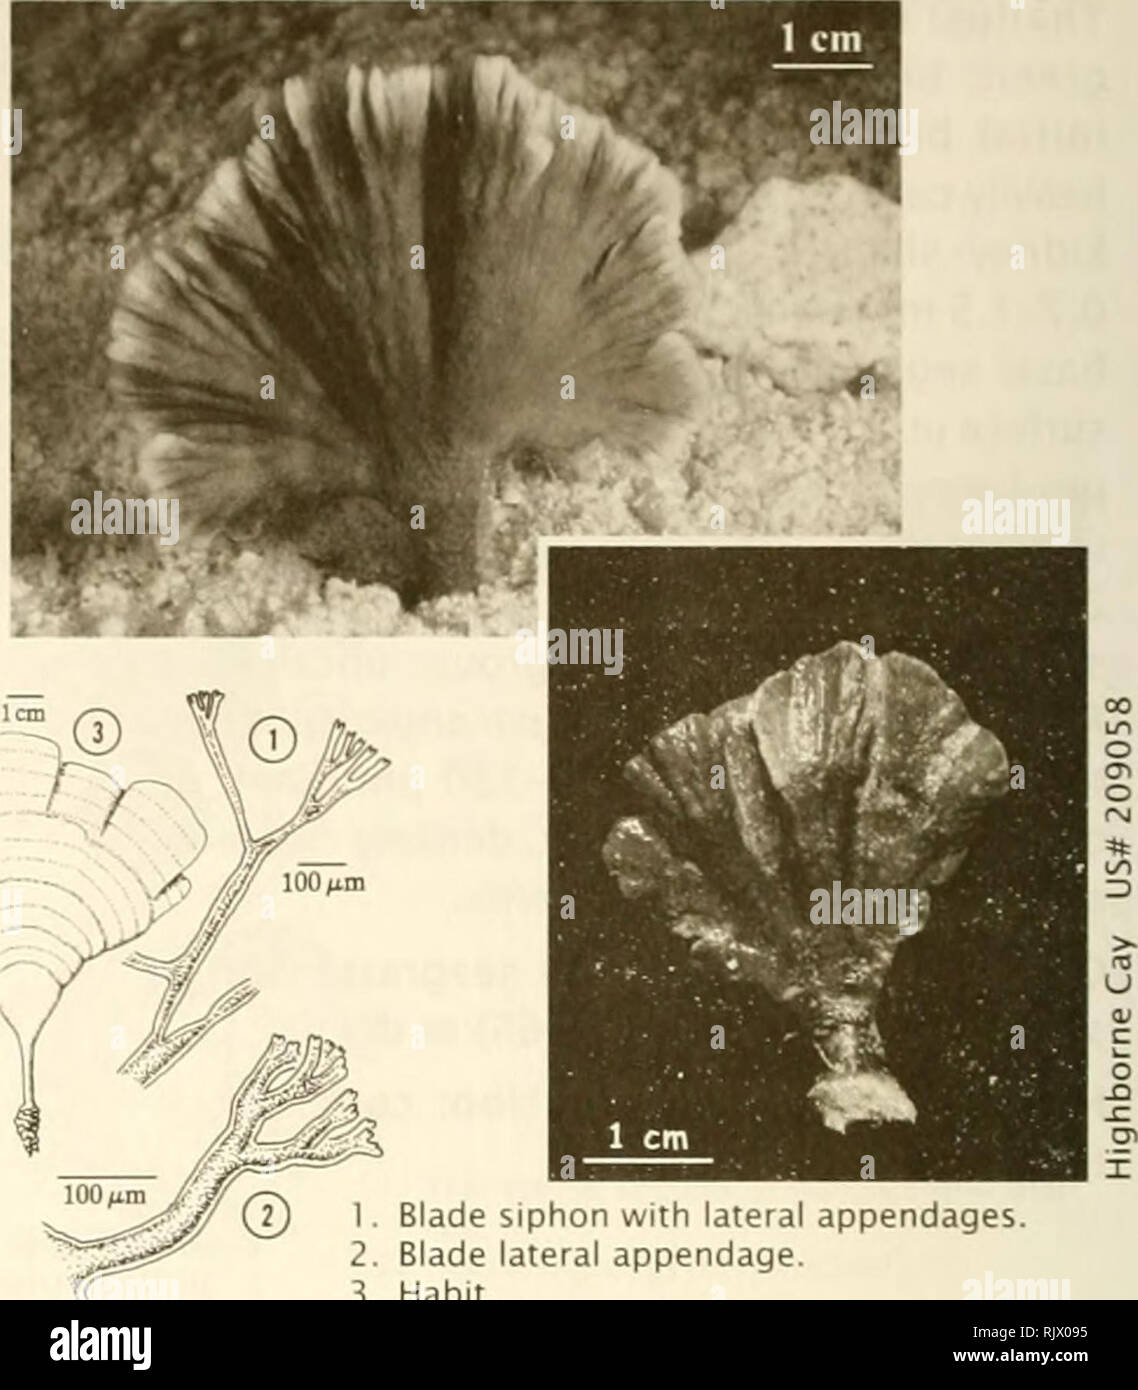 . Atoll research bulletin. Coral reefs and islands; Marine biology; Marine sciences. 86 UdOtea flabelllim (J- Ellis &amp; Solander) M. Howe 1904: 94 Thallus: fan- shaped, moderately calci ed, solitary, to 30 cm high, pale green to dark green. Blade variable, undivided to highly divided, size variable, 0.8-1.5 mm thick, leathery, corticated; zonation distinct; siphons 30-50 urn diam., constrictions above infre- quent dichotomies absent or slightly uneven; lateral appendages irregularly spaced, long stemmed, dichotomously branched with crowded, short, rounded apices, apices appear shrunken or at Stock Photo